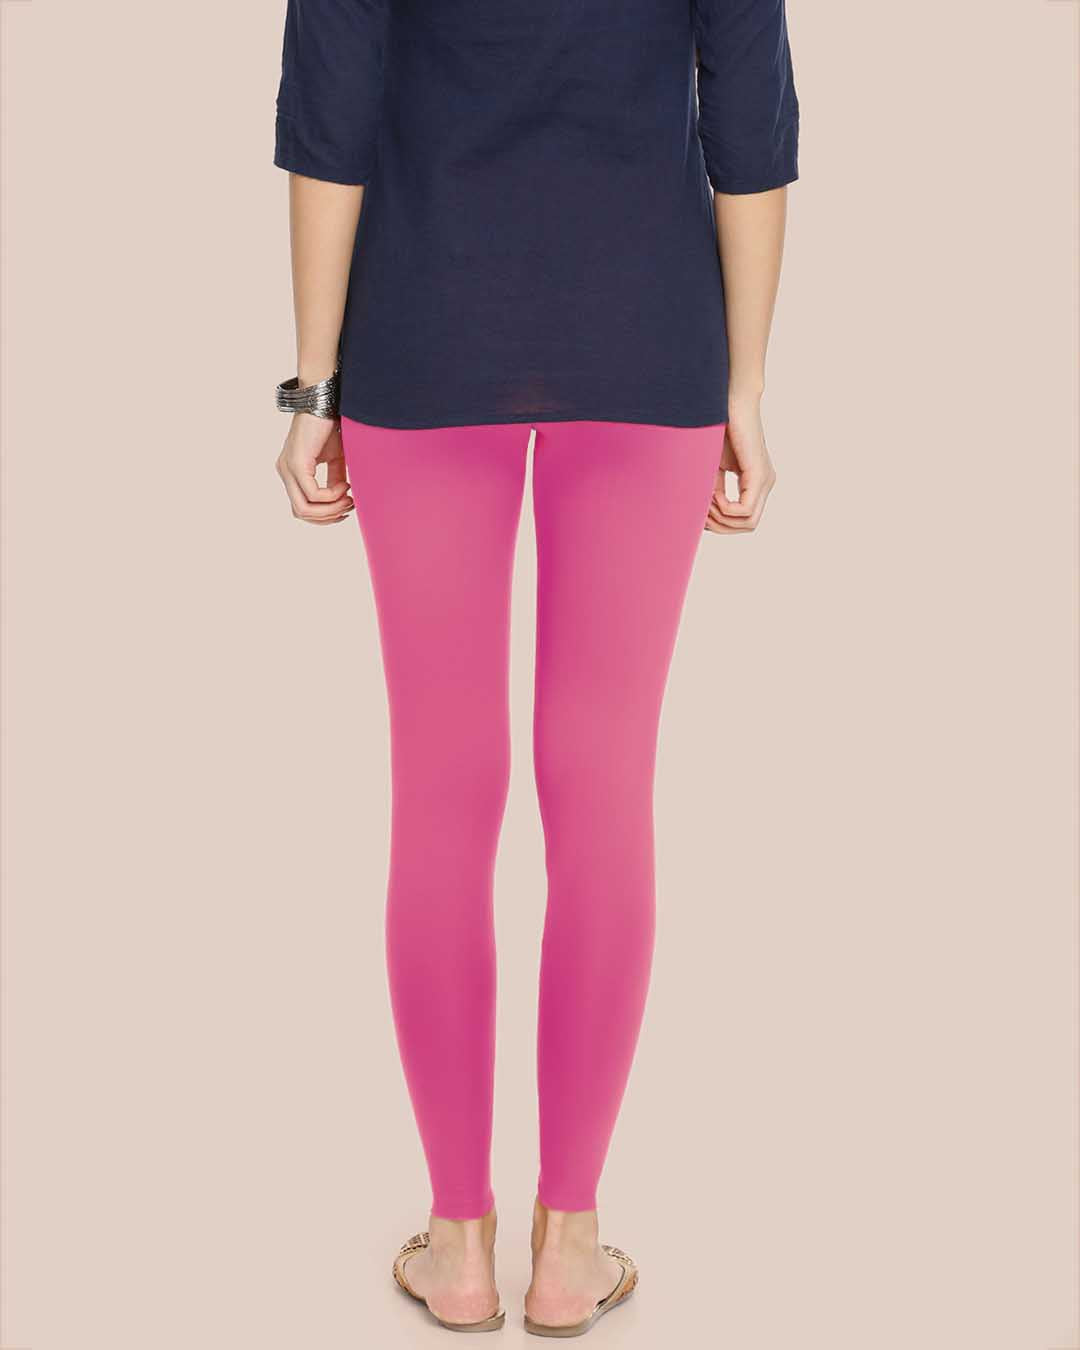 Mystic Pink Cotton Ankle Legging for College girls